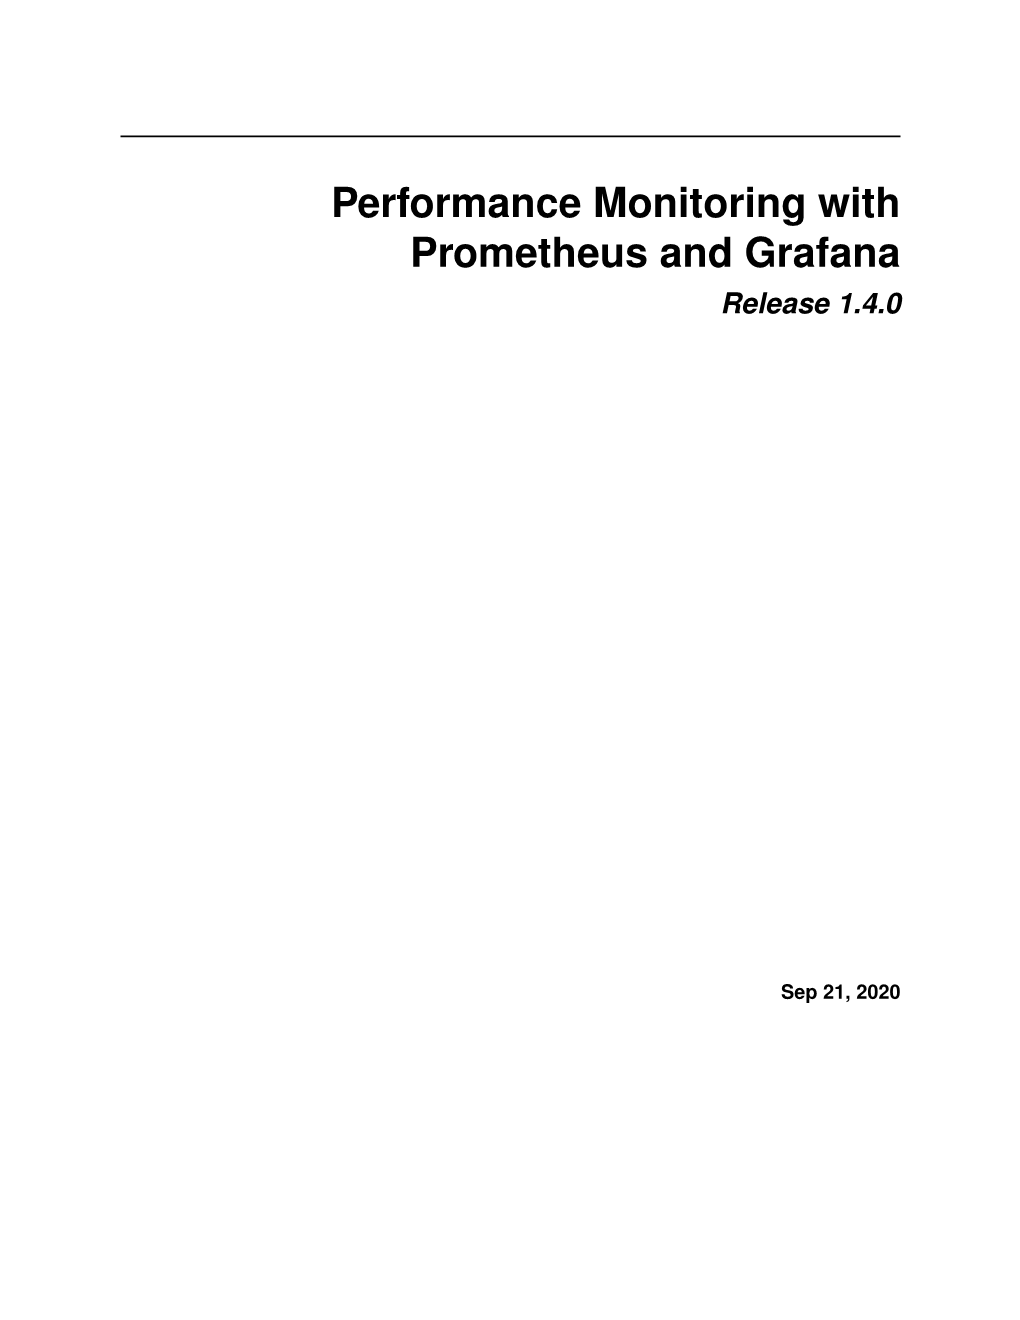 Performance Monitoring with Prometheus and Grafana Release 1.4.0